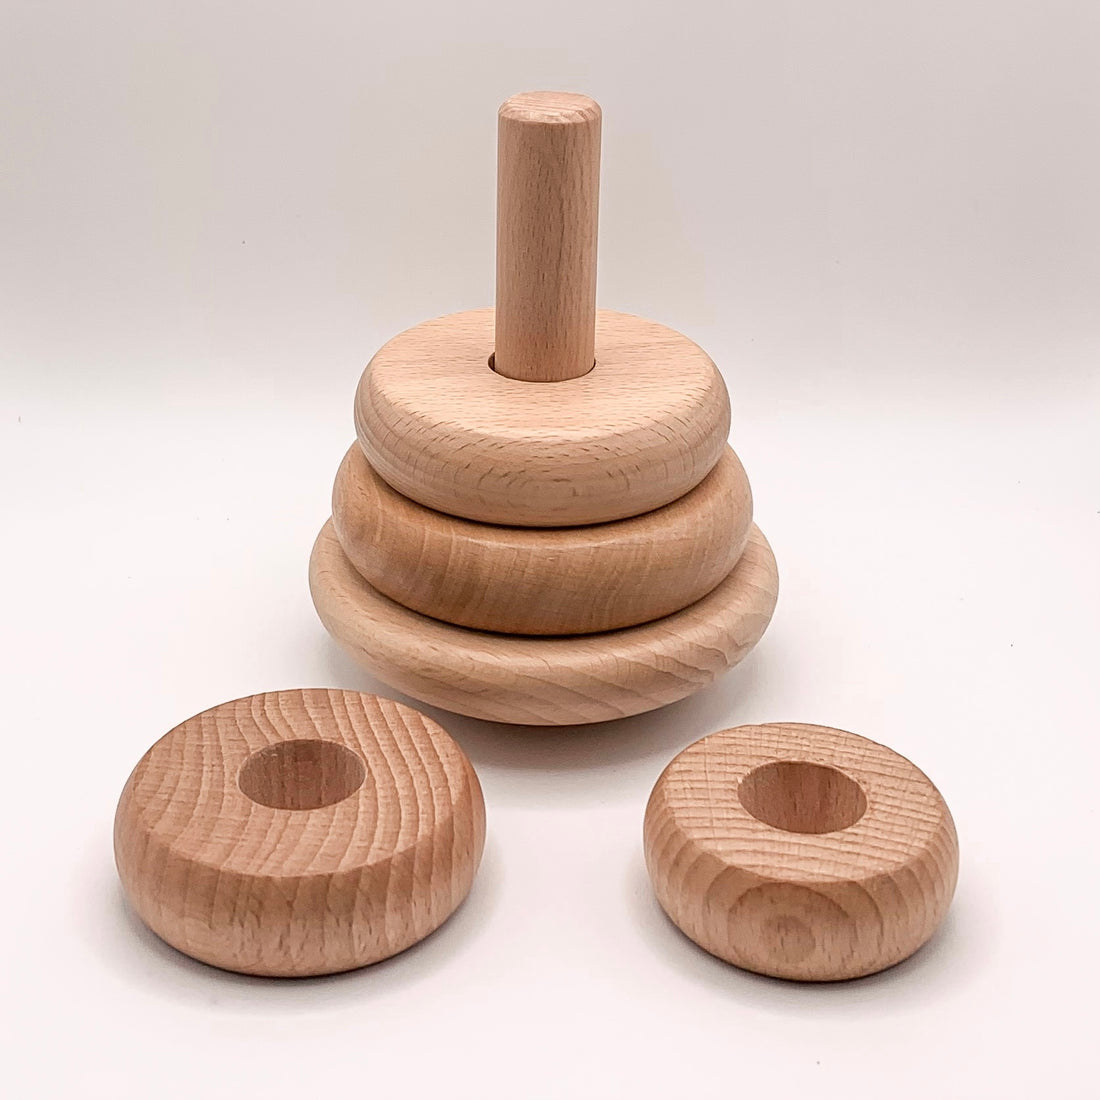 The Small Wooden Stacking Toy